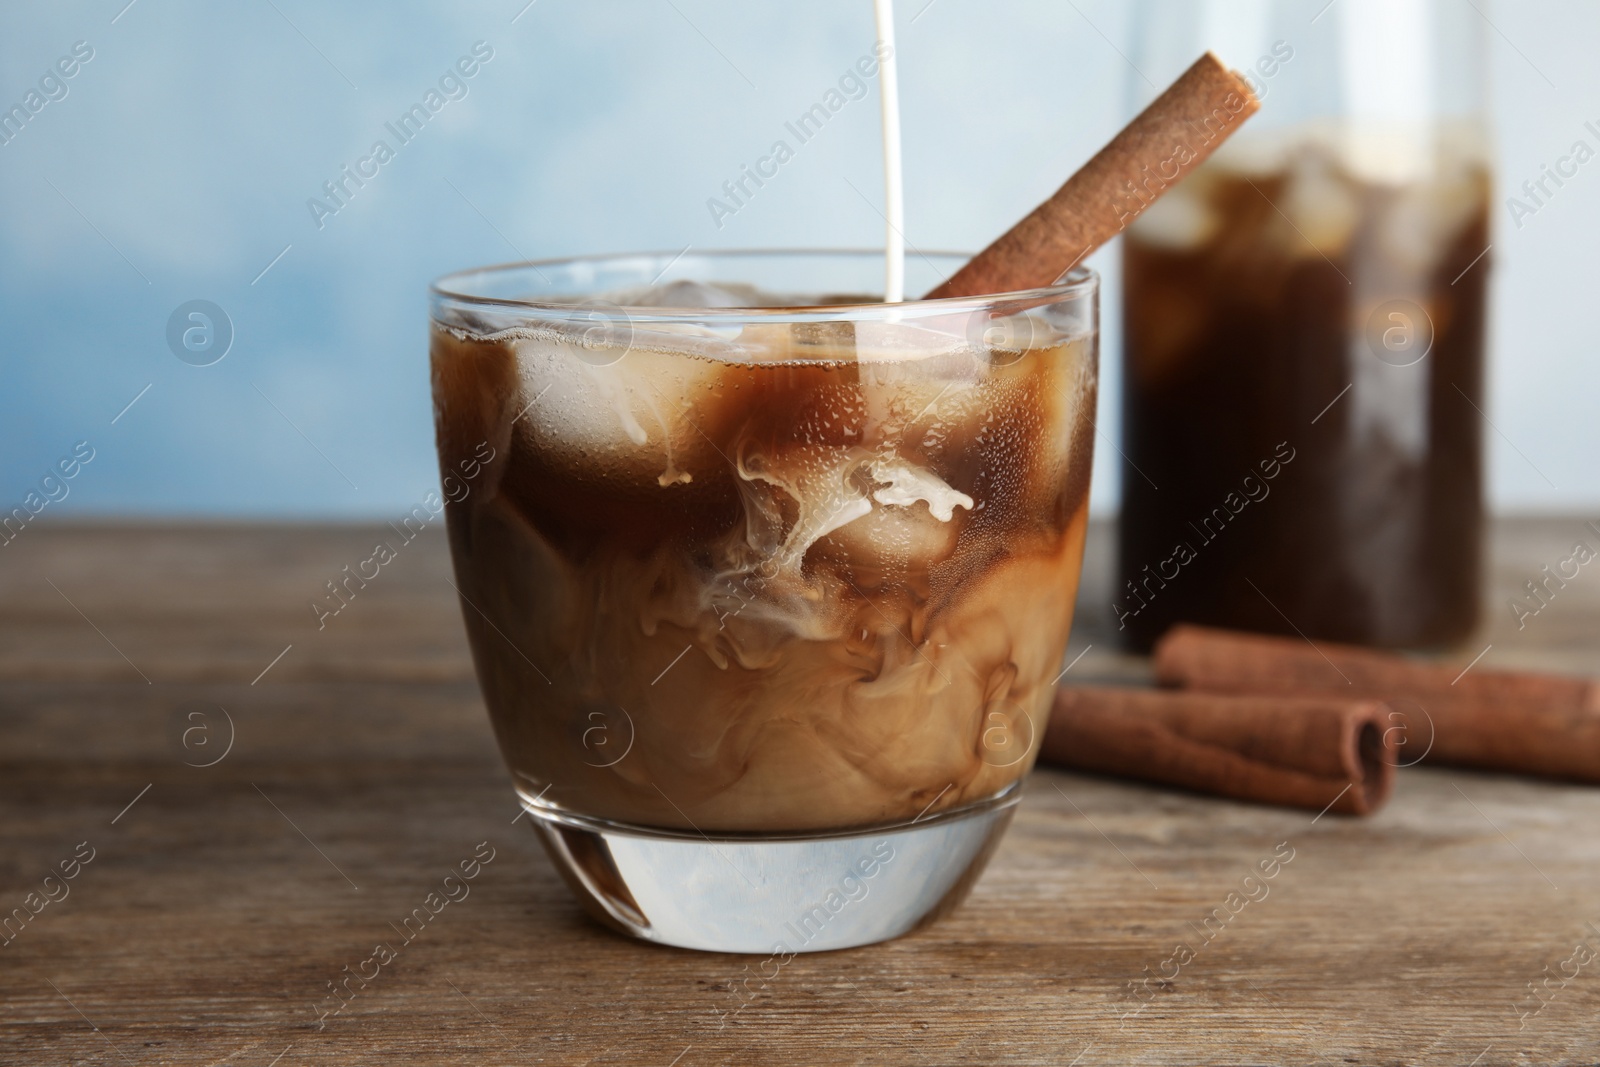 Photo of Pouring milk into glass of coffee with ice cubes on table against color background